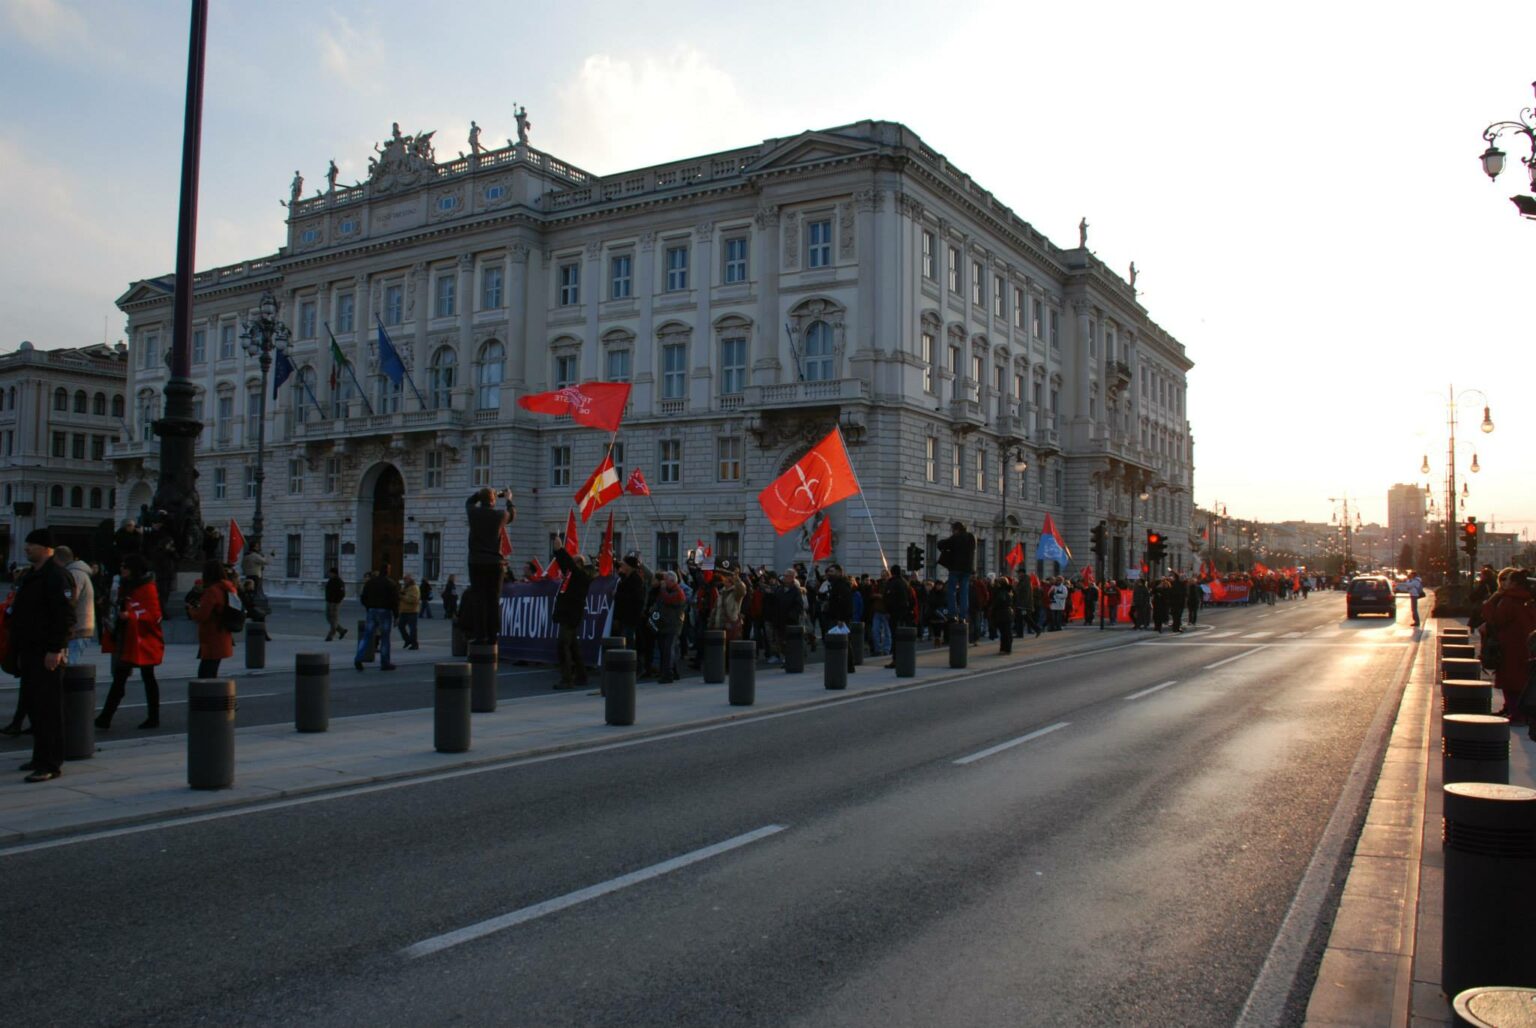 December 8th, 2013: Free Trieste's demonstration "Our future is our Port".